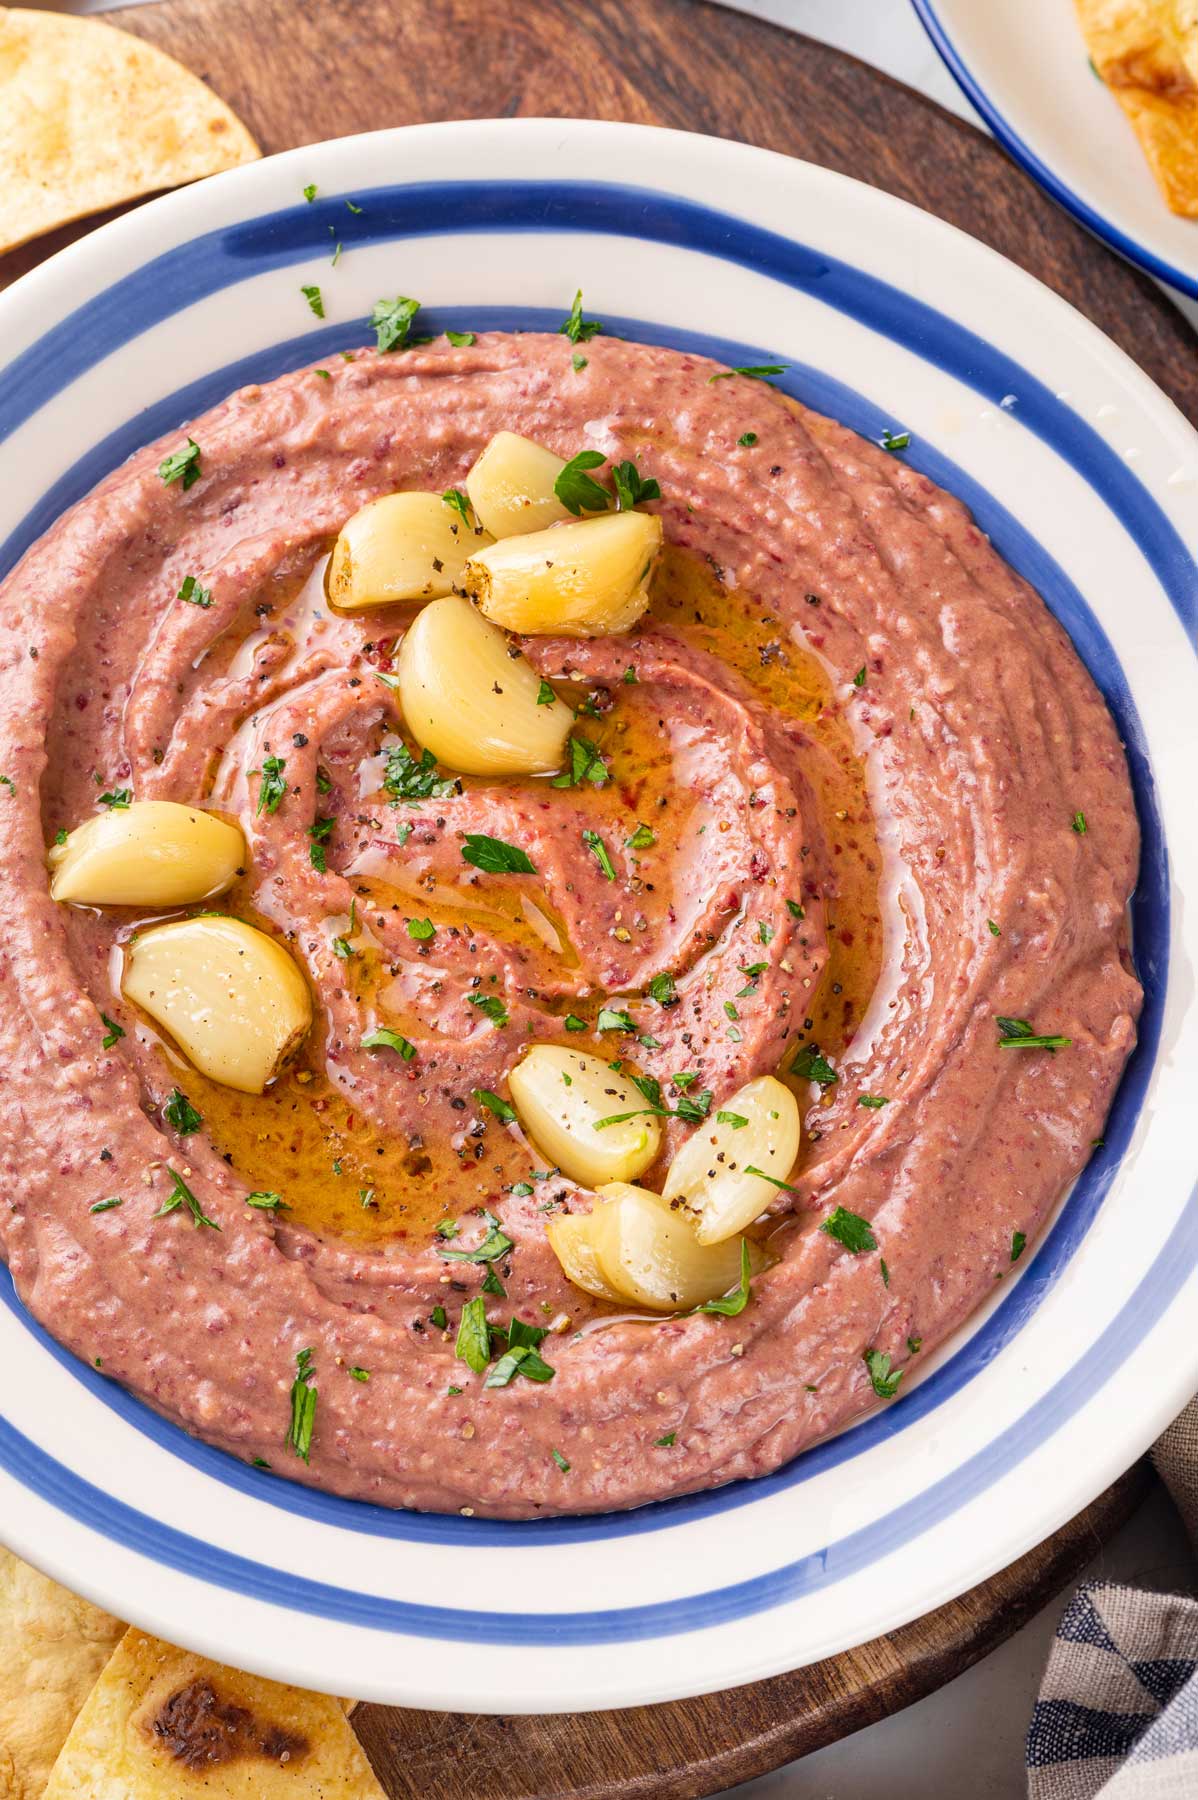 Red kidney bean hummus with roasted garlic in a serving bowl